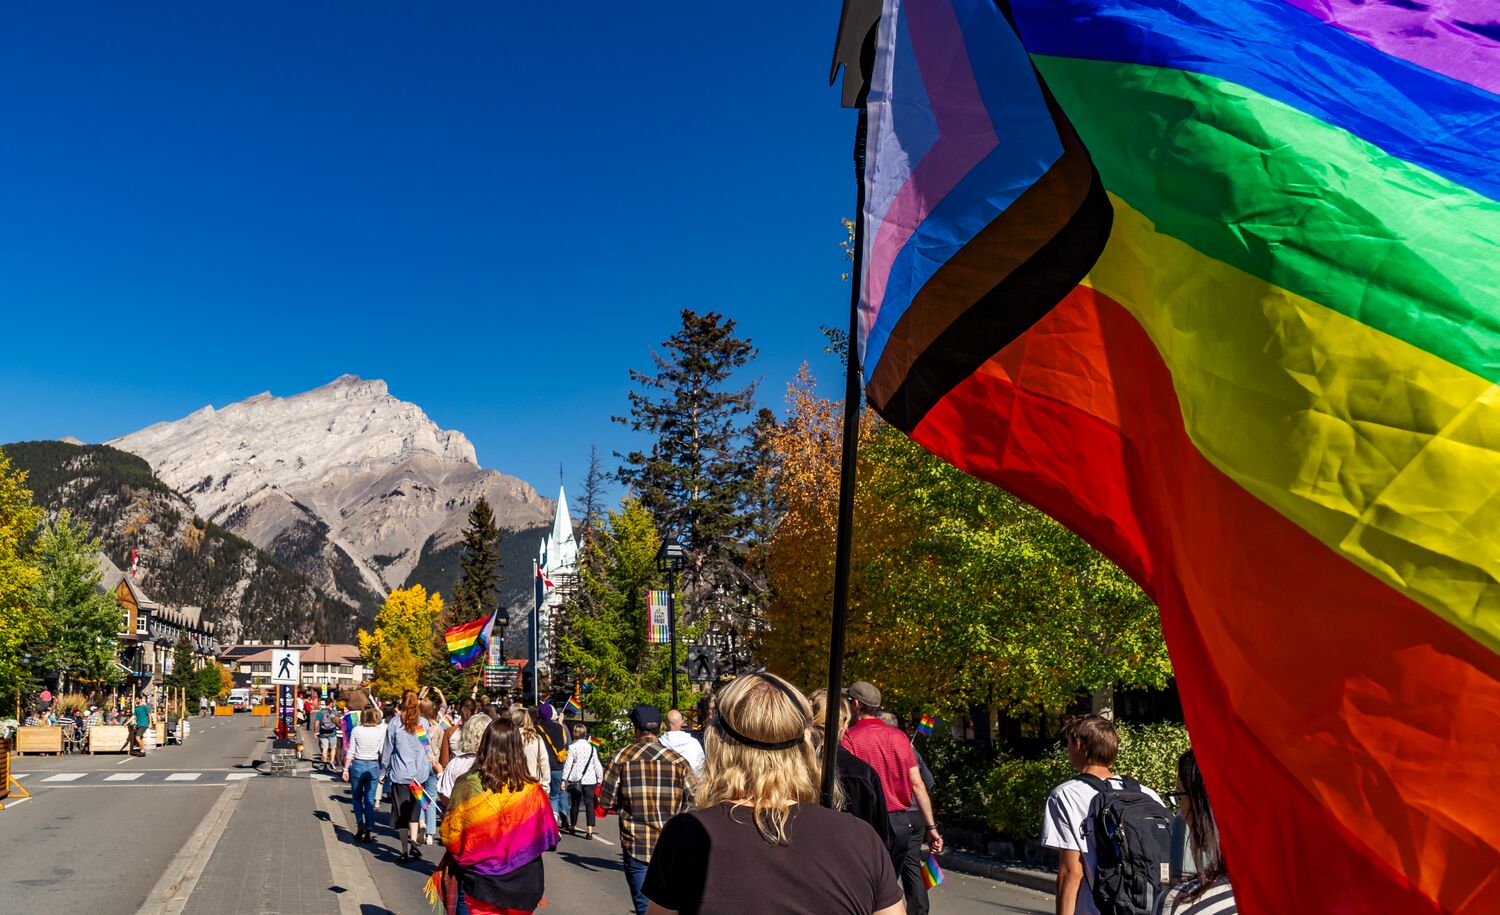 A Progressive Pride Flag flies close to the camera during the Banff Pride March on Banff Ave with Cascade Mountain in the background.